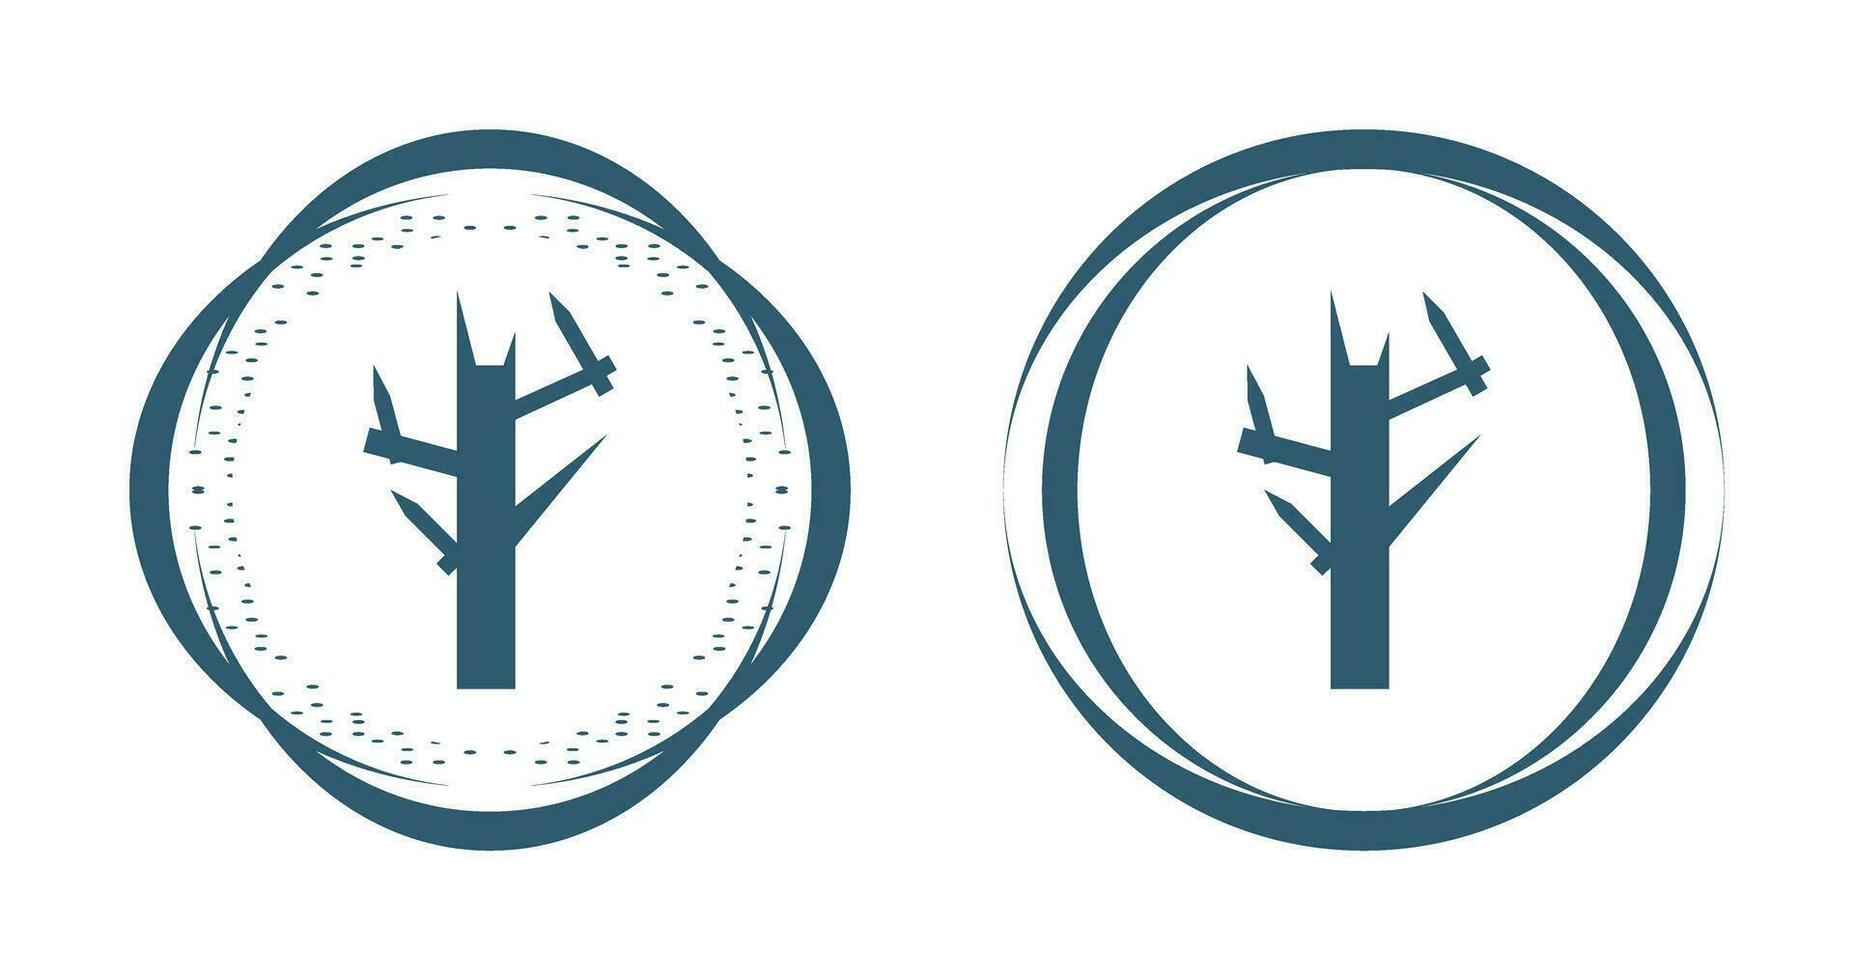 Tree with no leaves Vector Icon